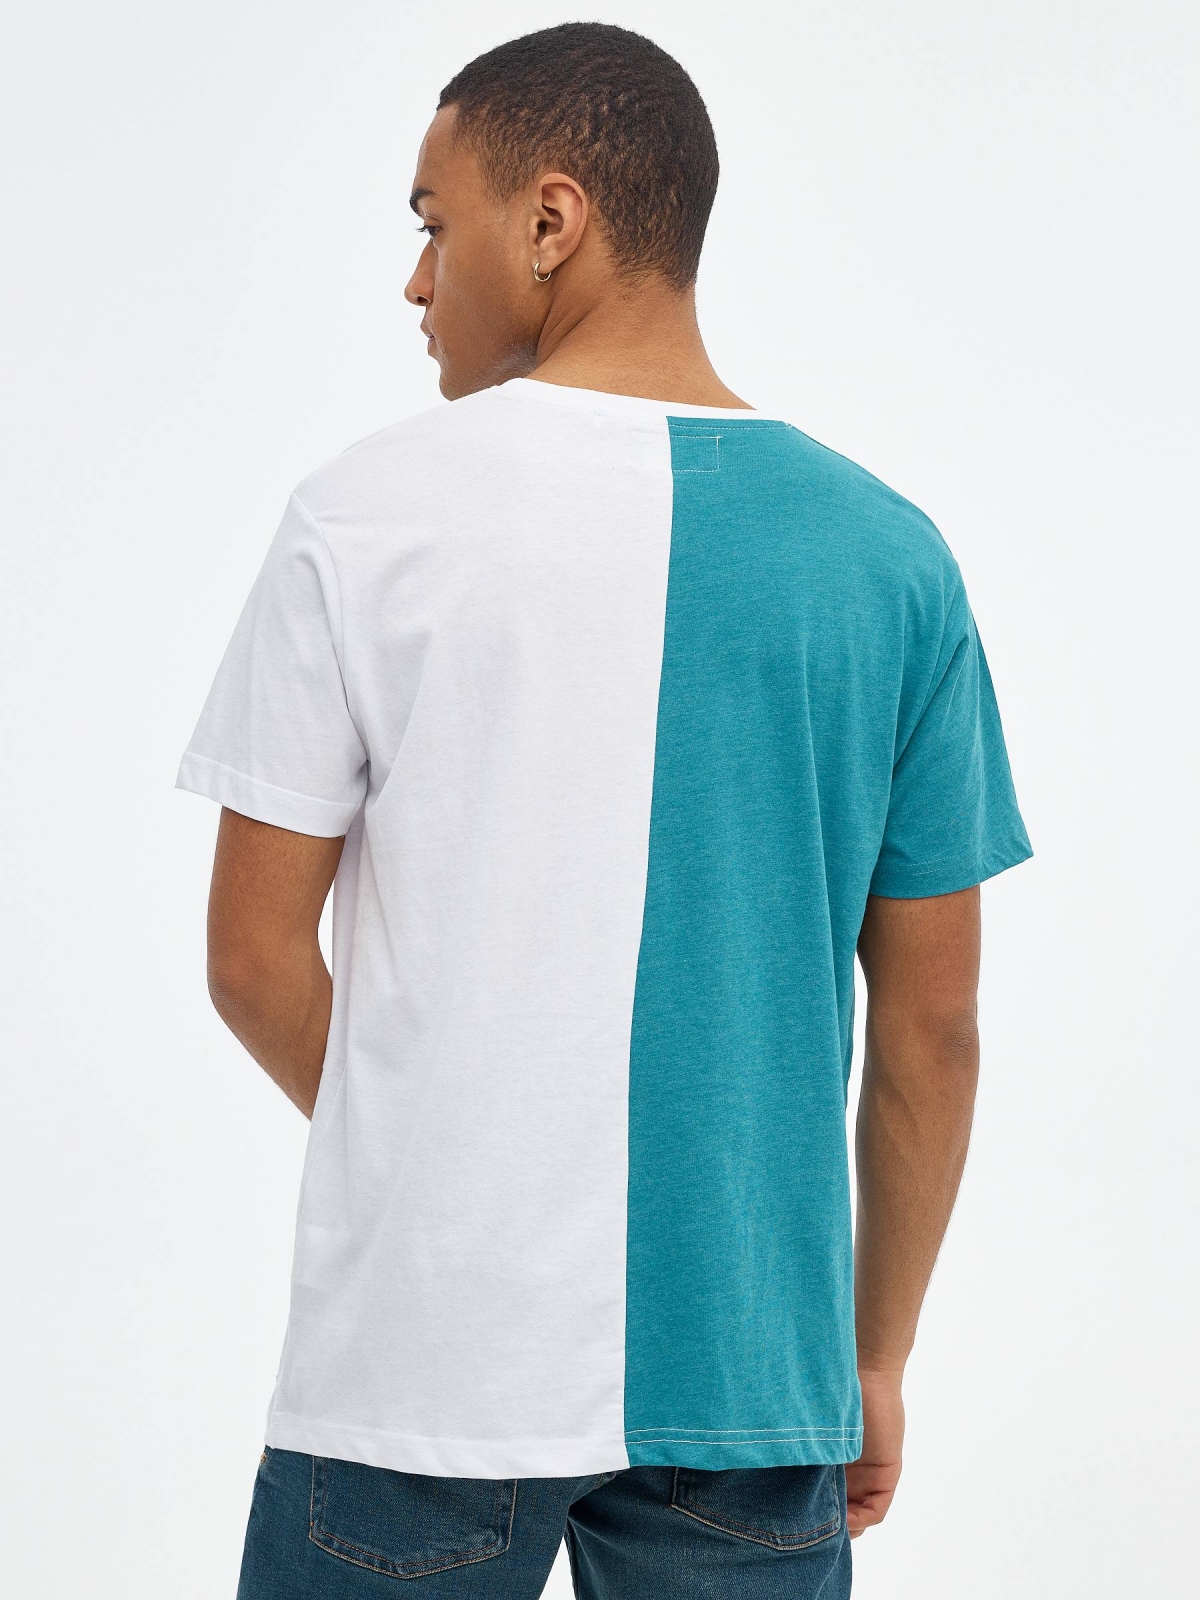 ATYPICAL T-shirt emerald middle back view